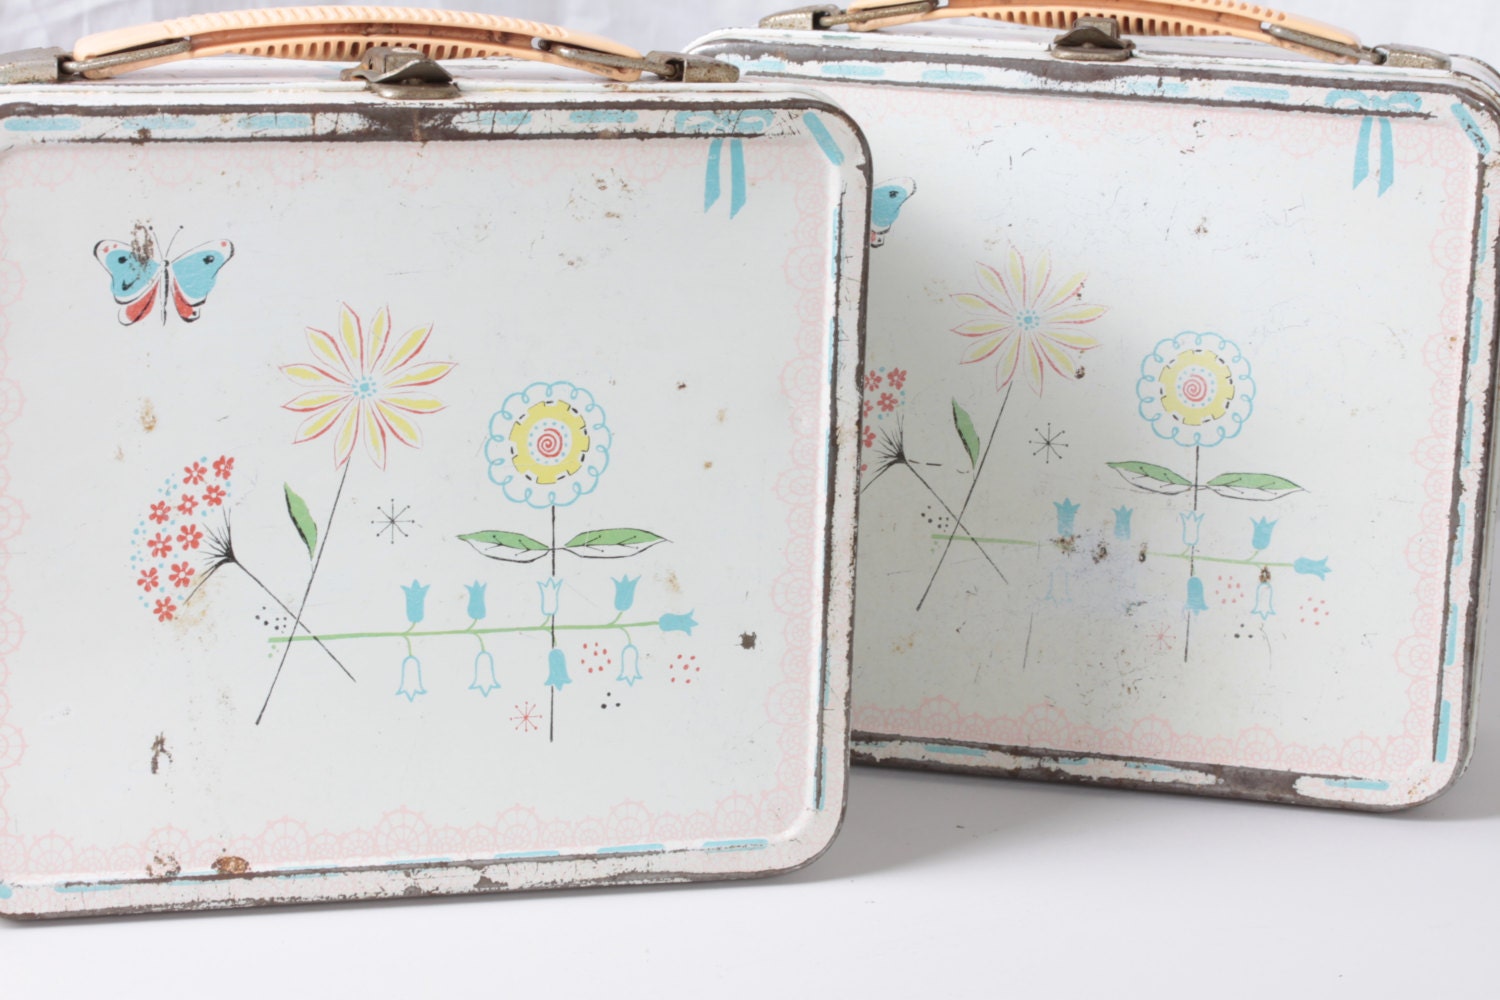 Retro 1950 Aladdin Jr. Miss Lunch Box with Butterflies and Abstract Flowers - Fleaosophy